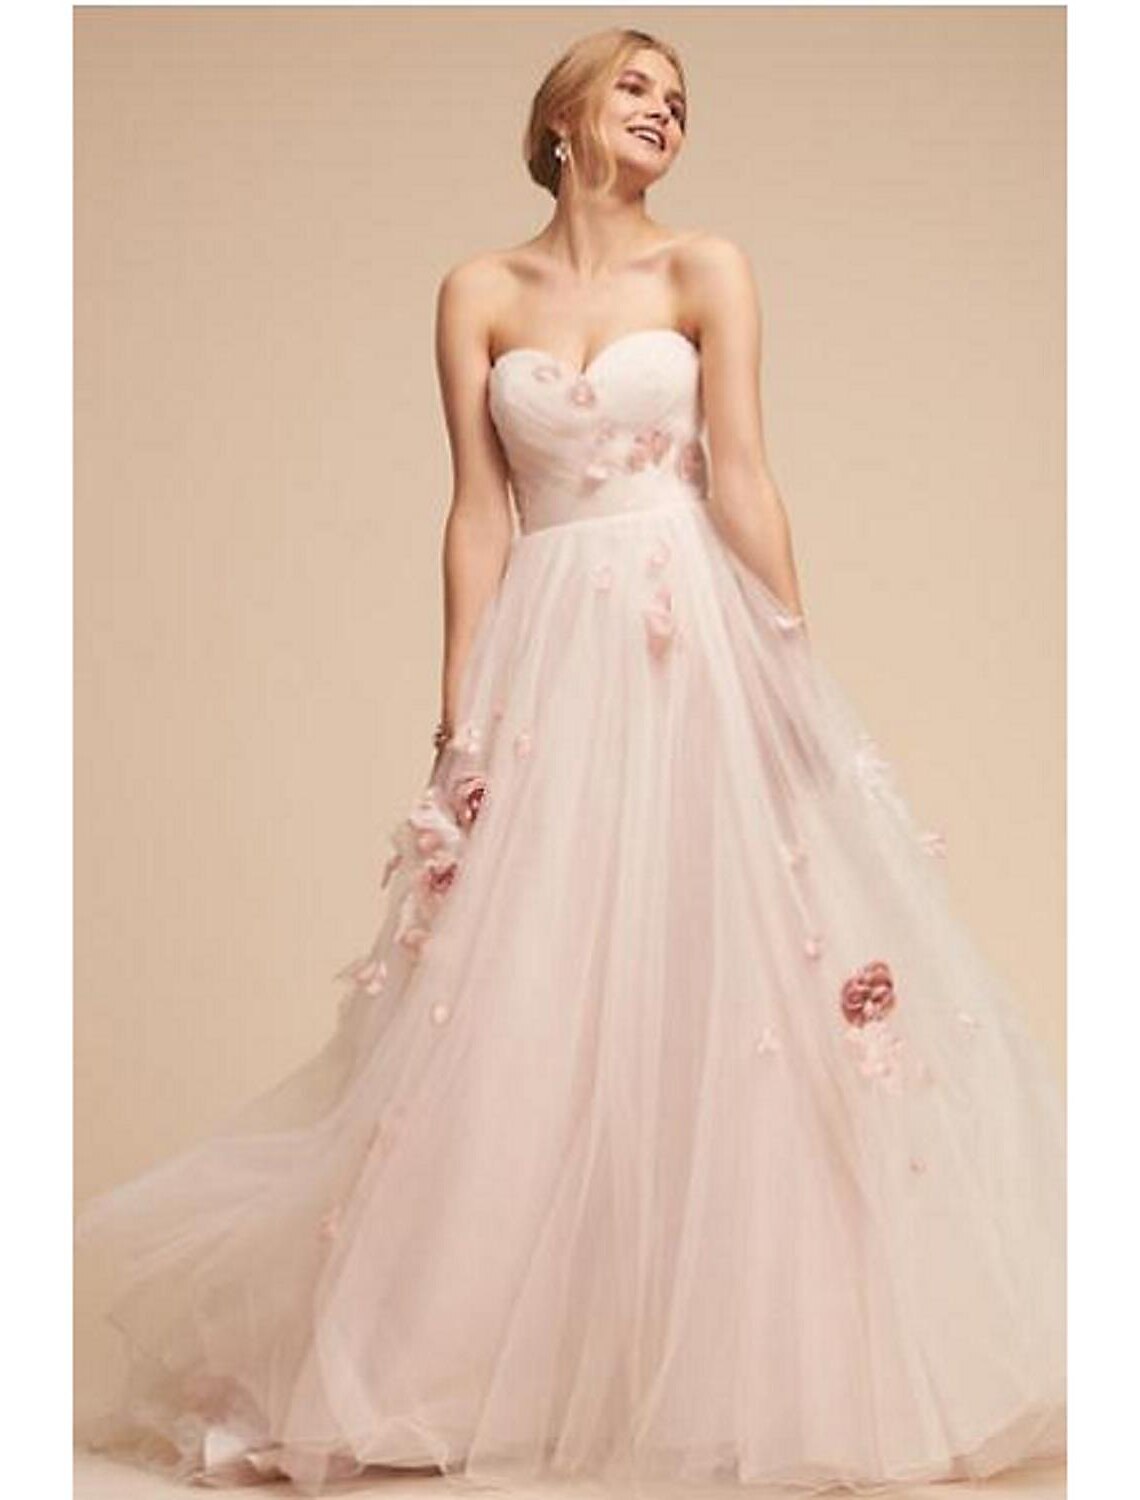 Beach Wedding Dresses Princess Sweetheart Sleeveless Sweep / Brush Train Tulle Bridal Gowns With Appliques Flower